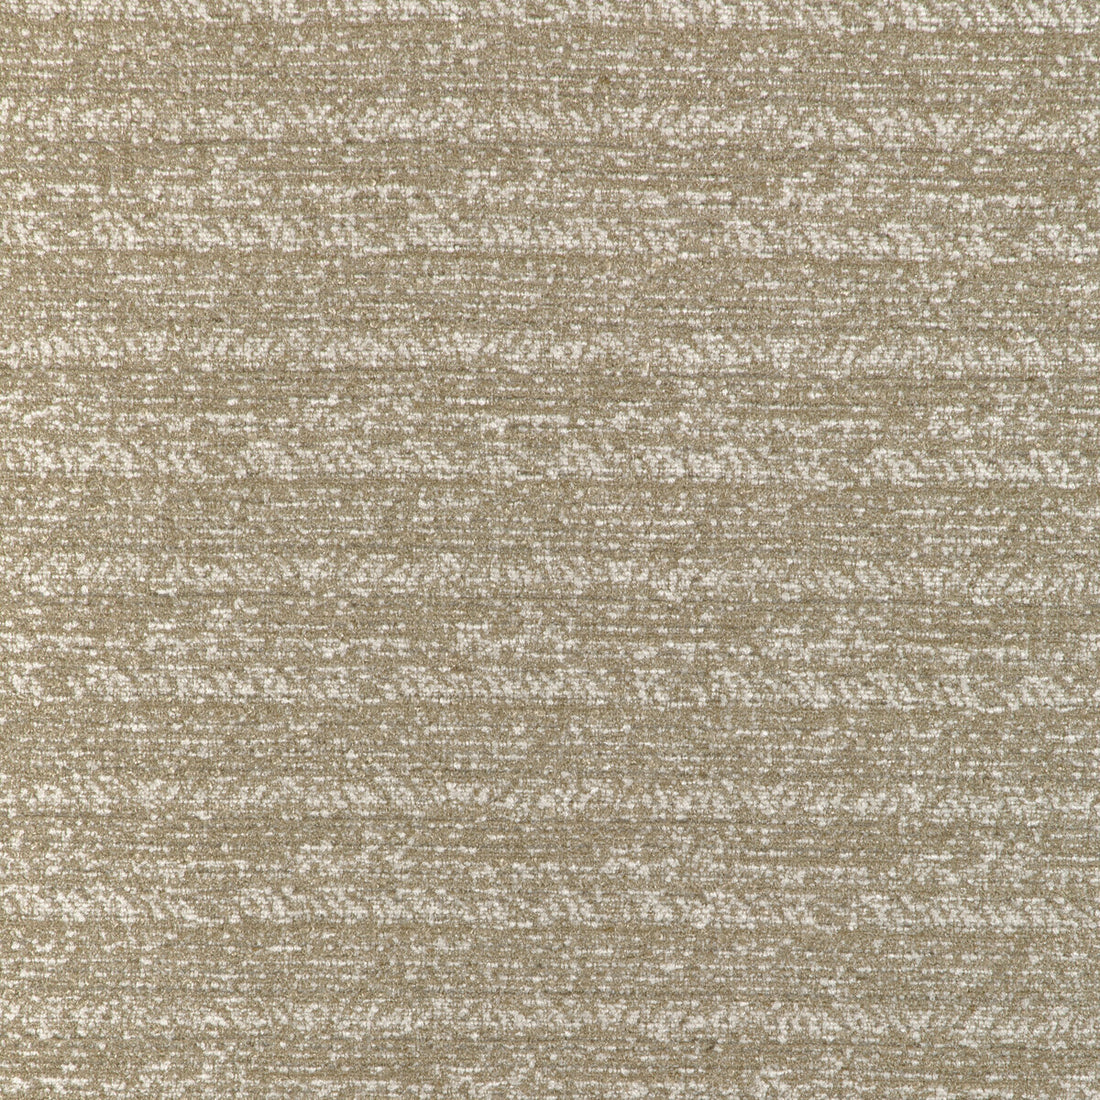 Kravet Smart fabric in 37209-16 color - pattern 37209.16.0 - by Kravet Smart in the Woven Colors collection